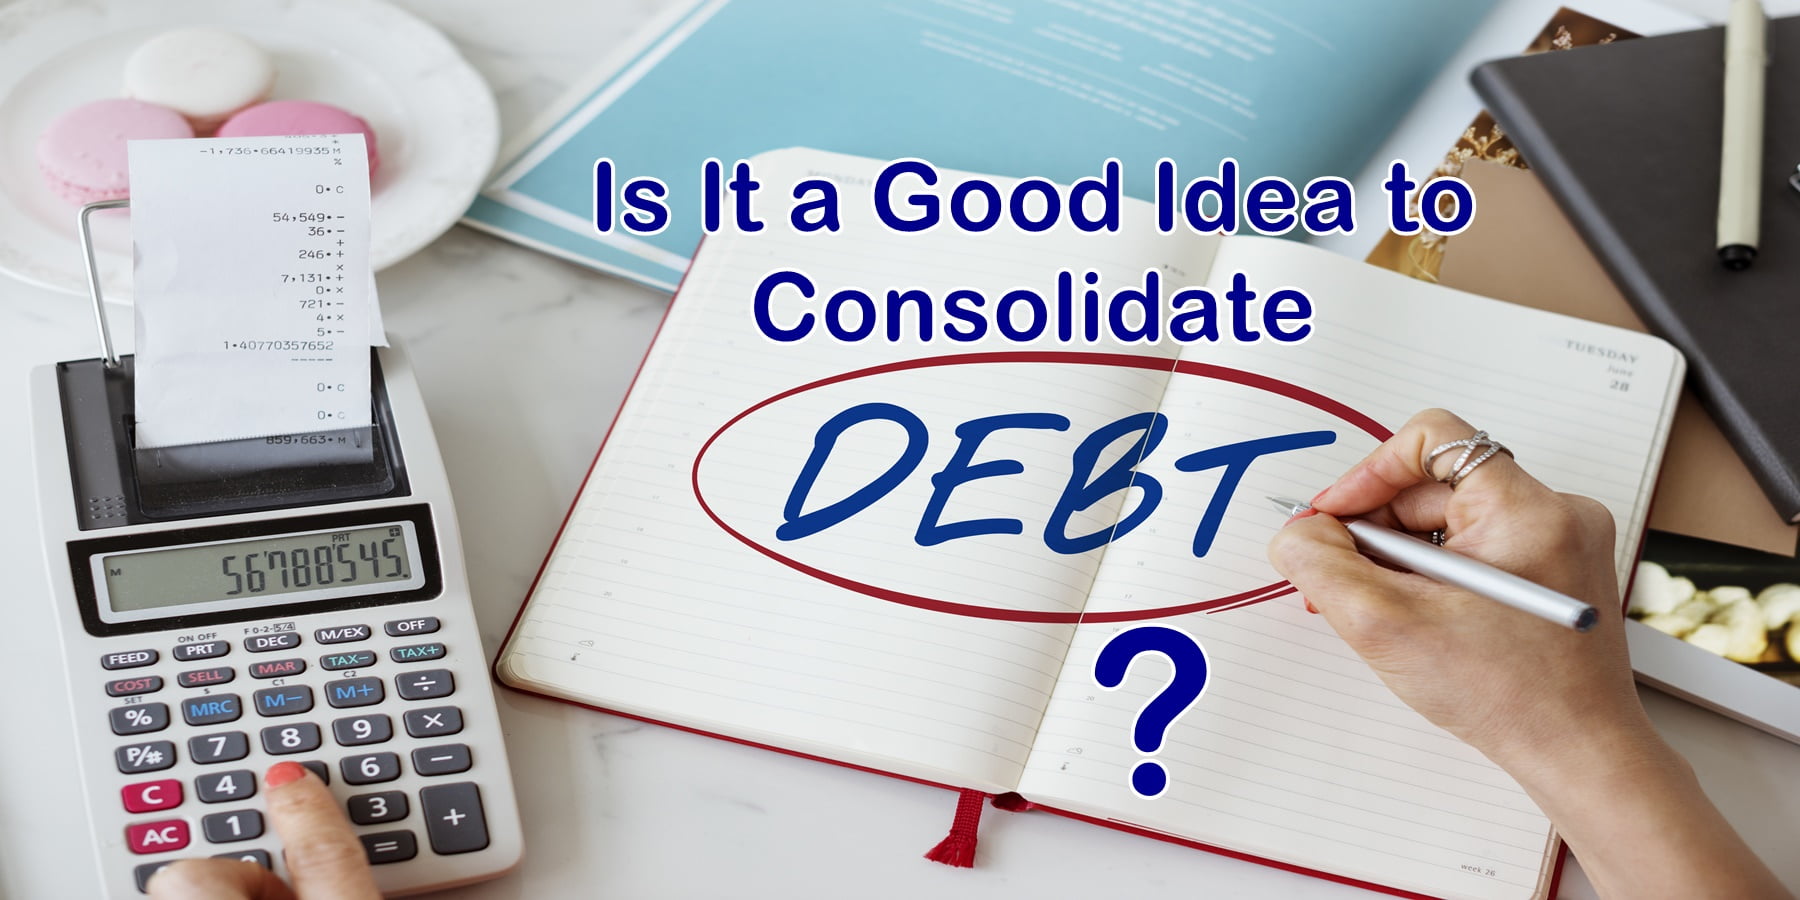 Is It a Good Idea to Consolidate Debt?